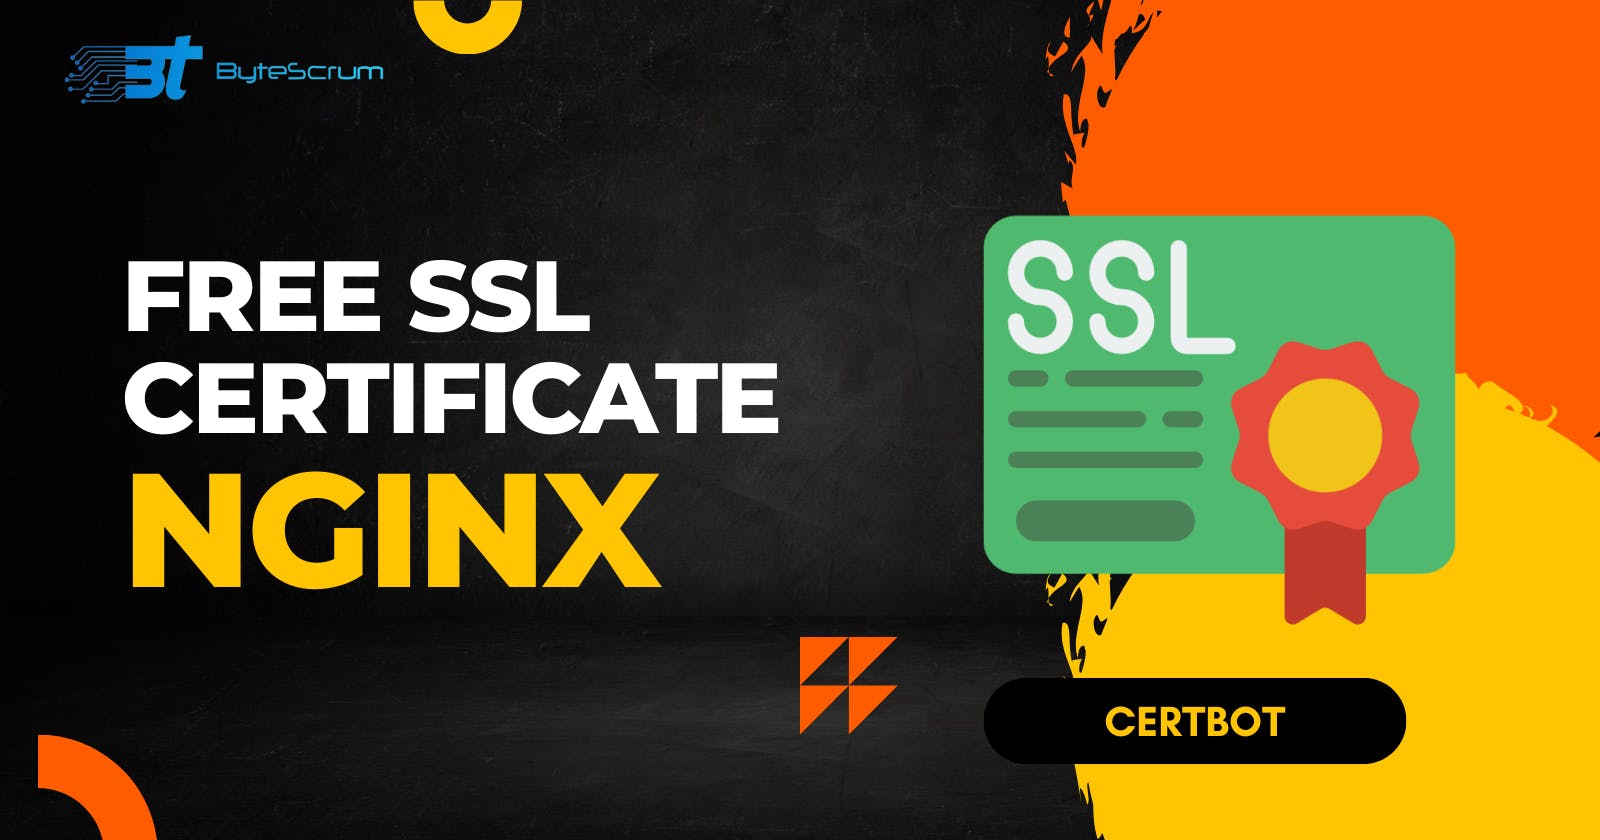 Adding a free SSL Certificate to an Nginx Site Using Certbot